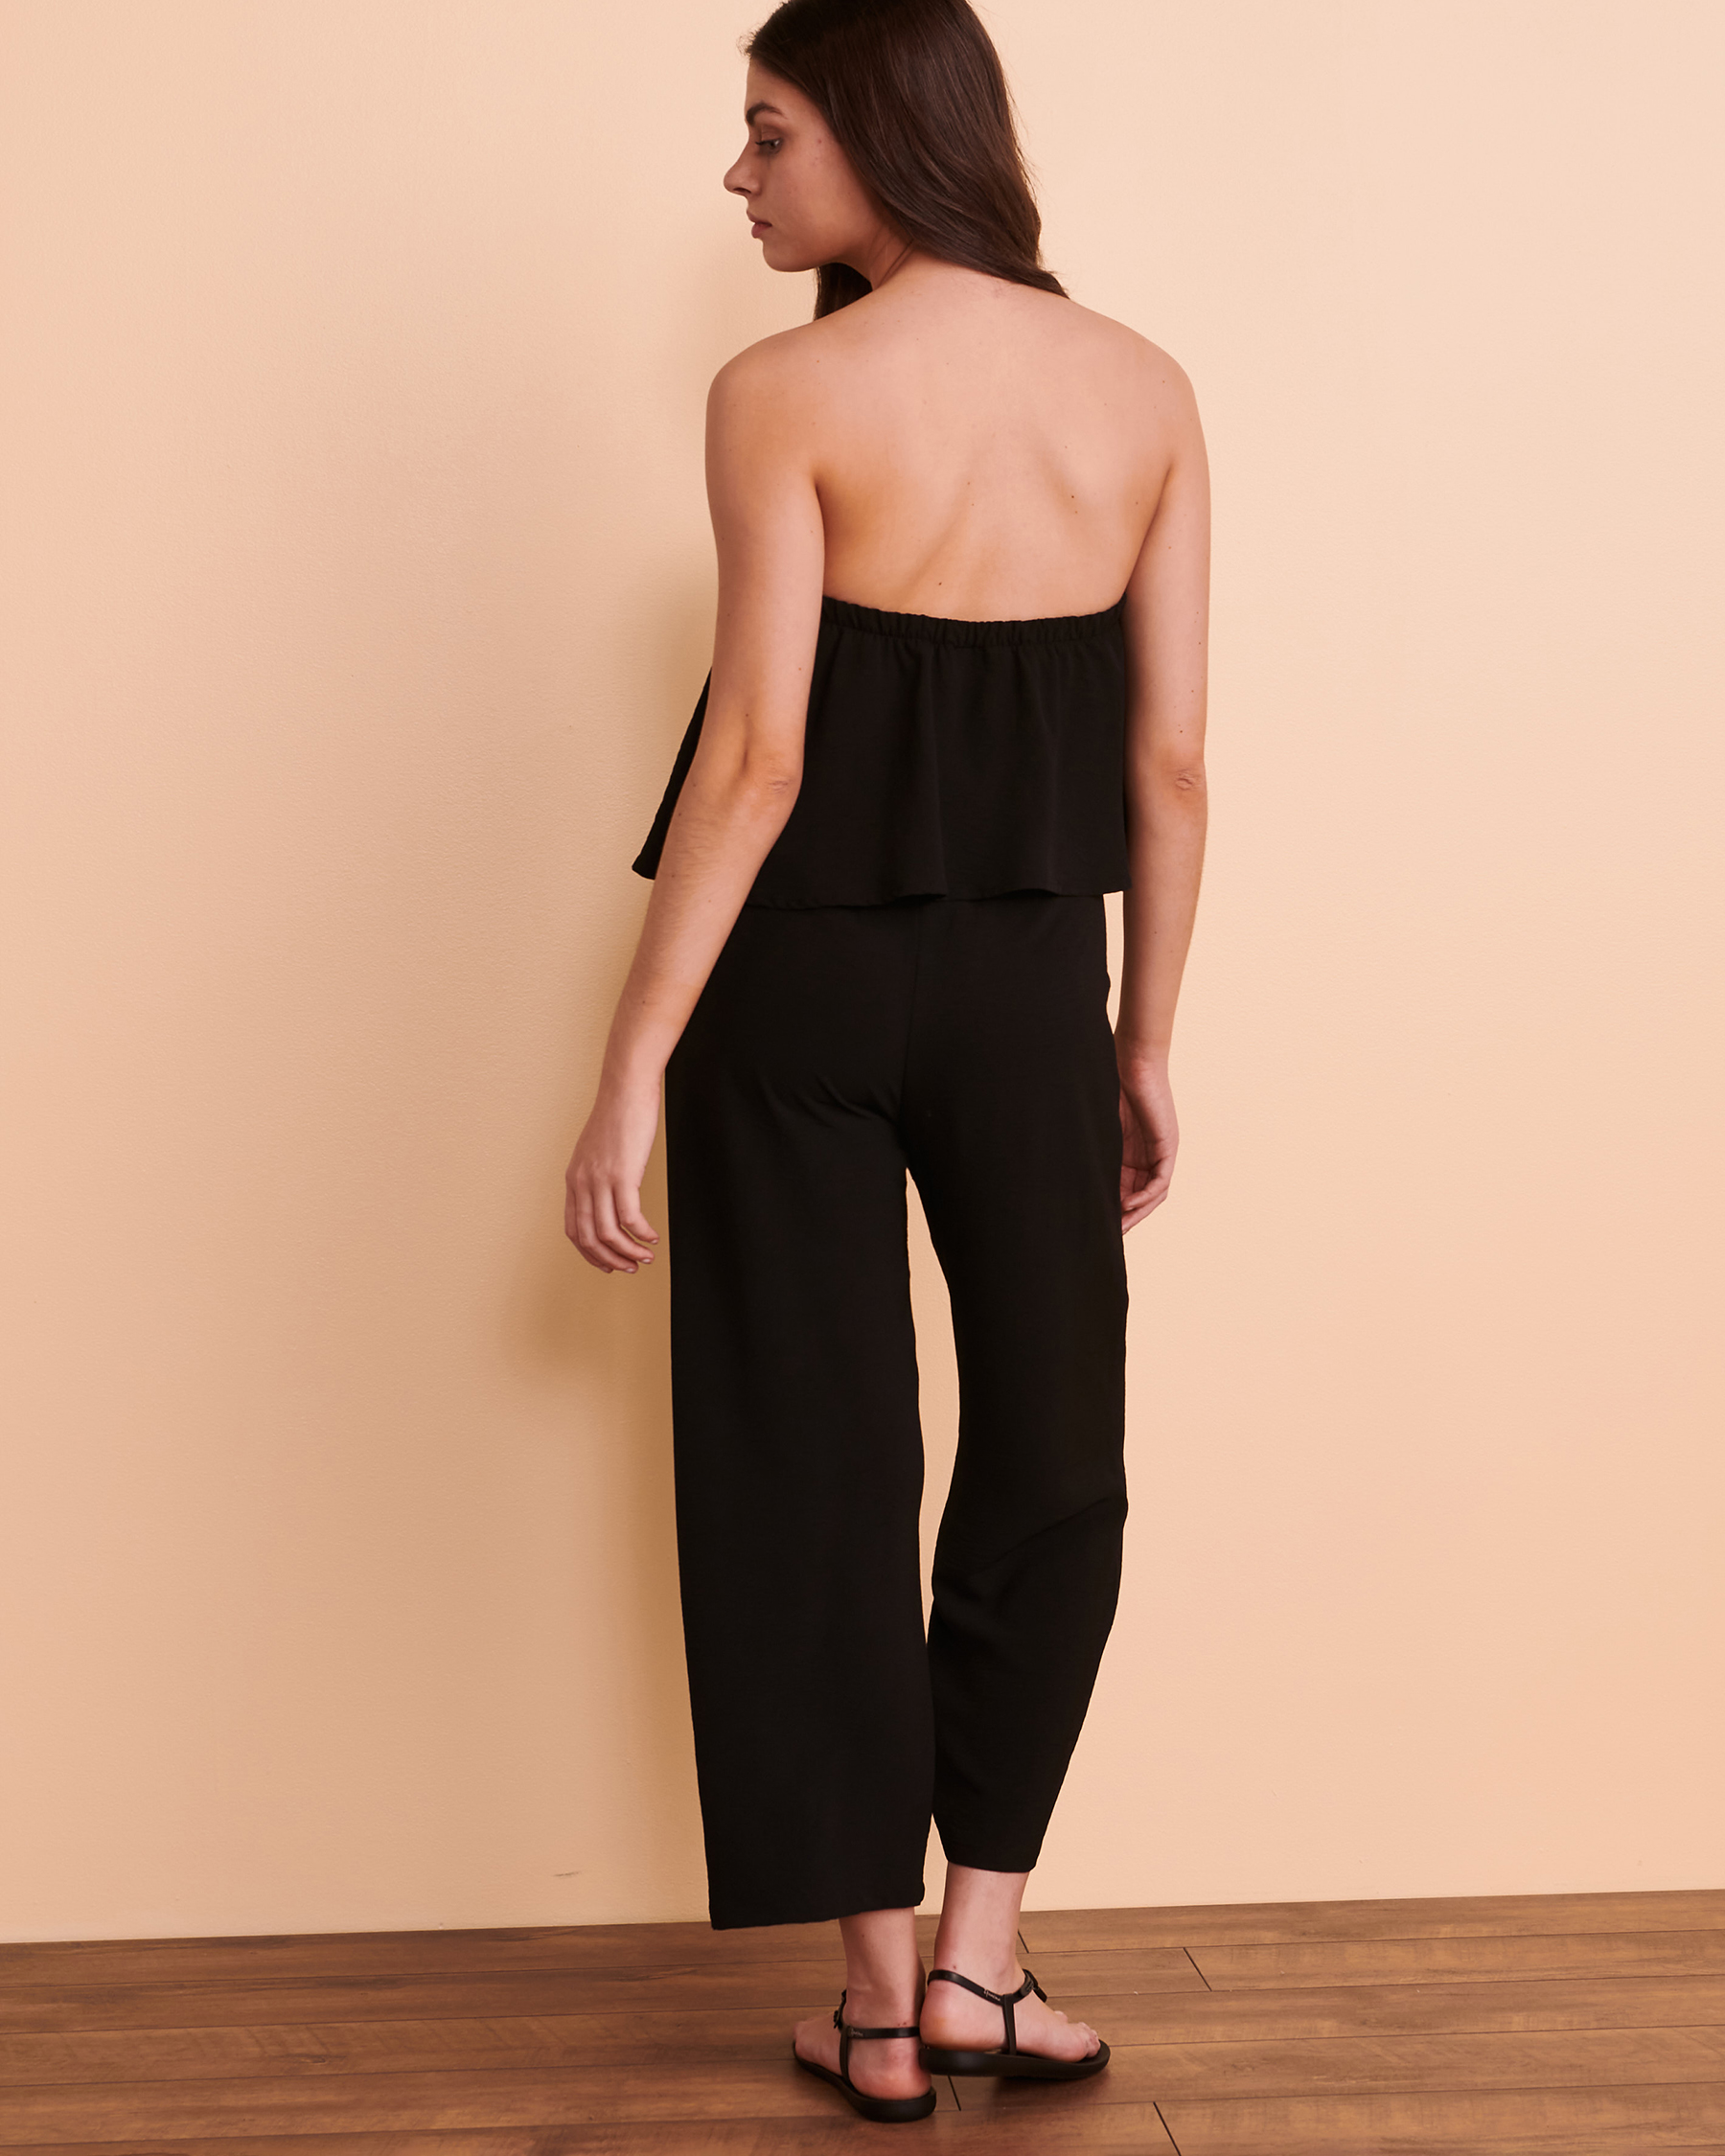 COVER ME Sleeveless Jumpsuit Black 22022517 - View2